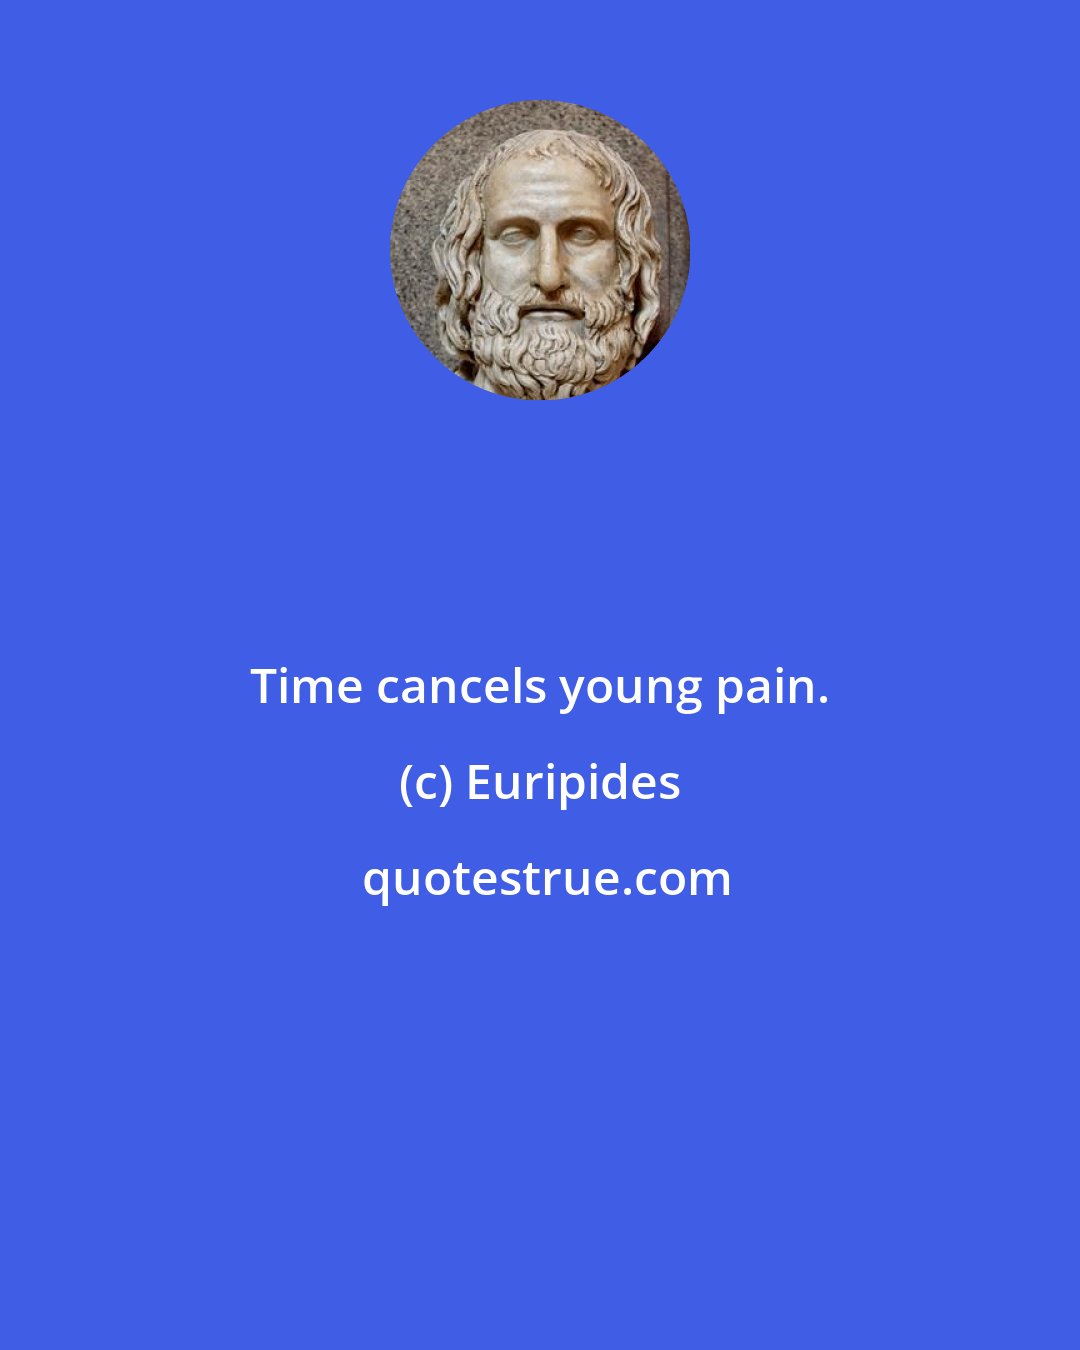 Euripides: Time cancels young pain.